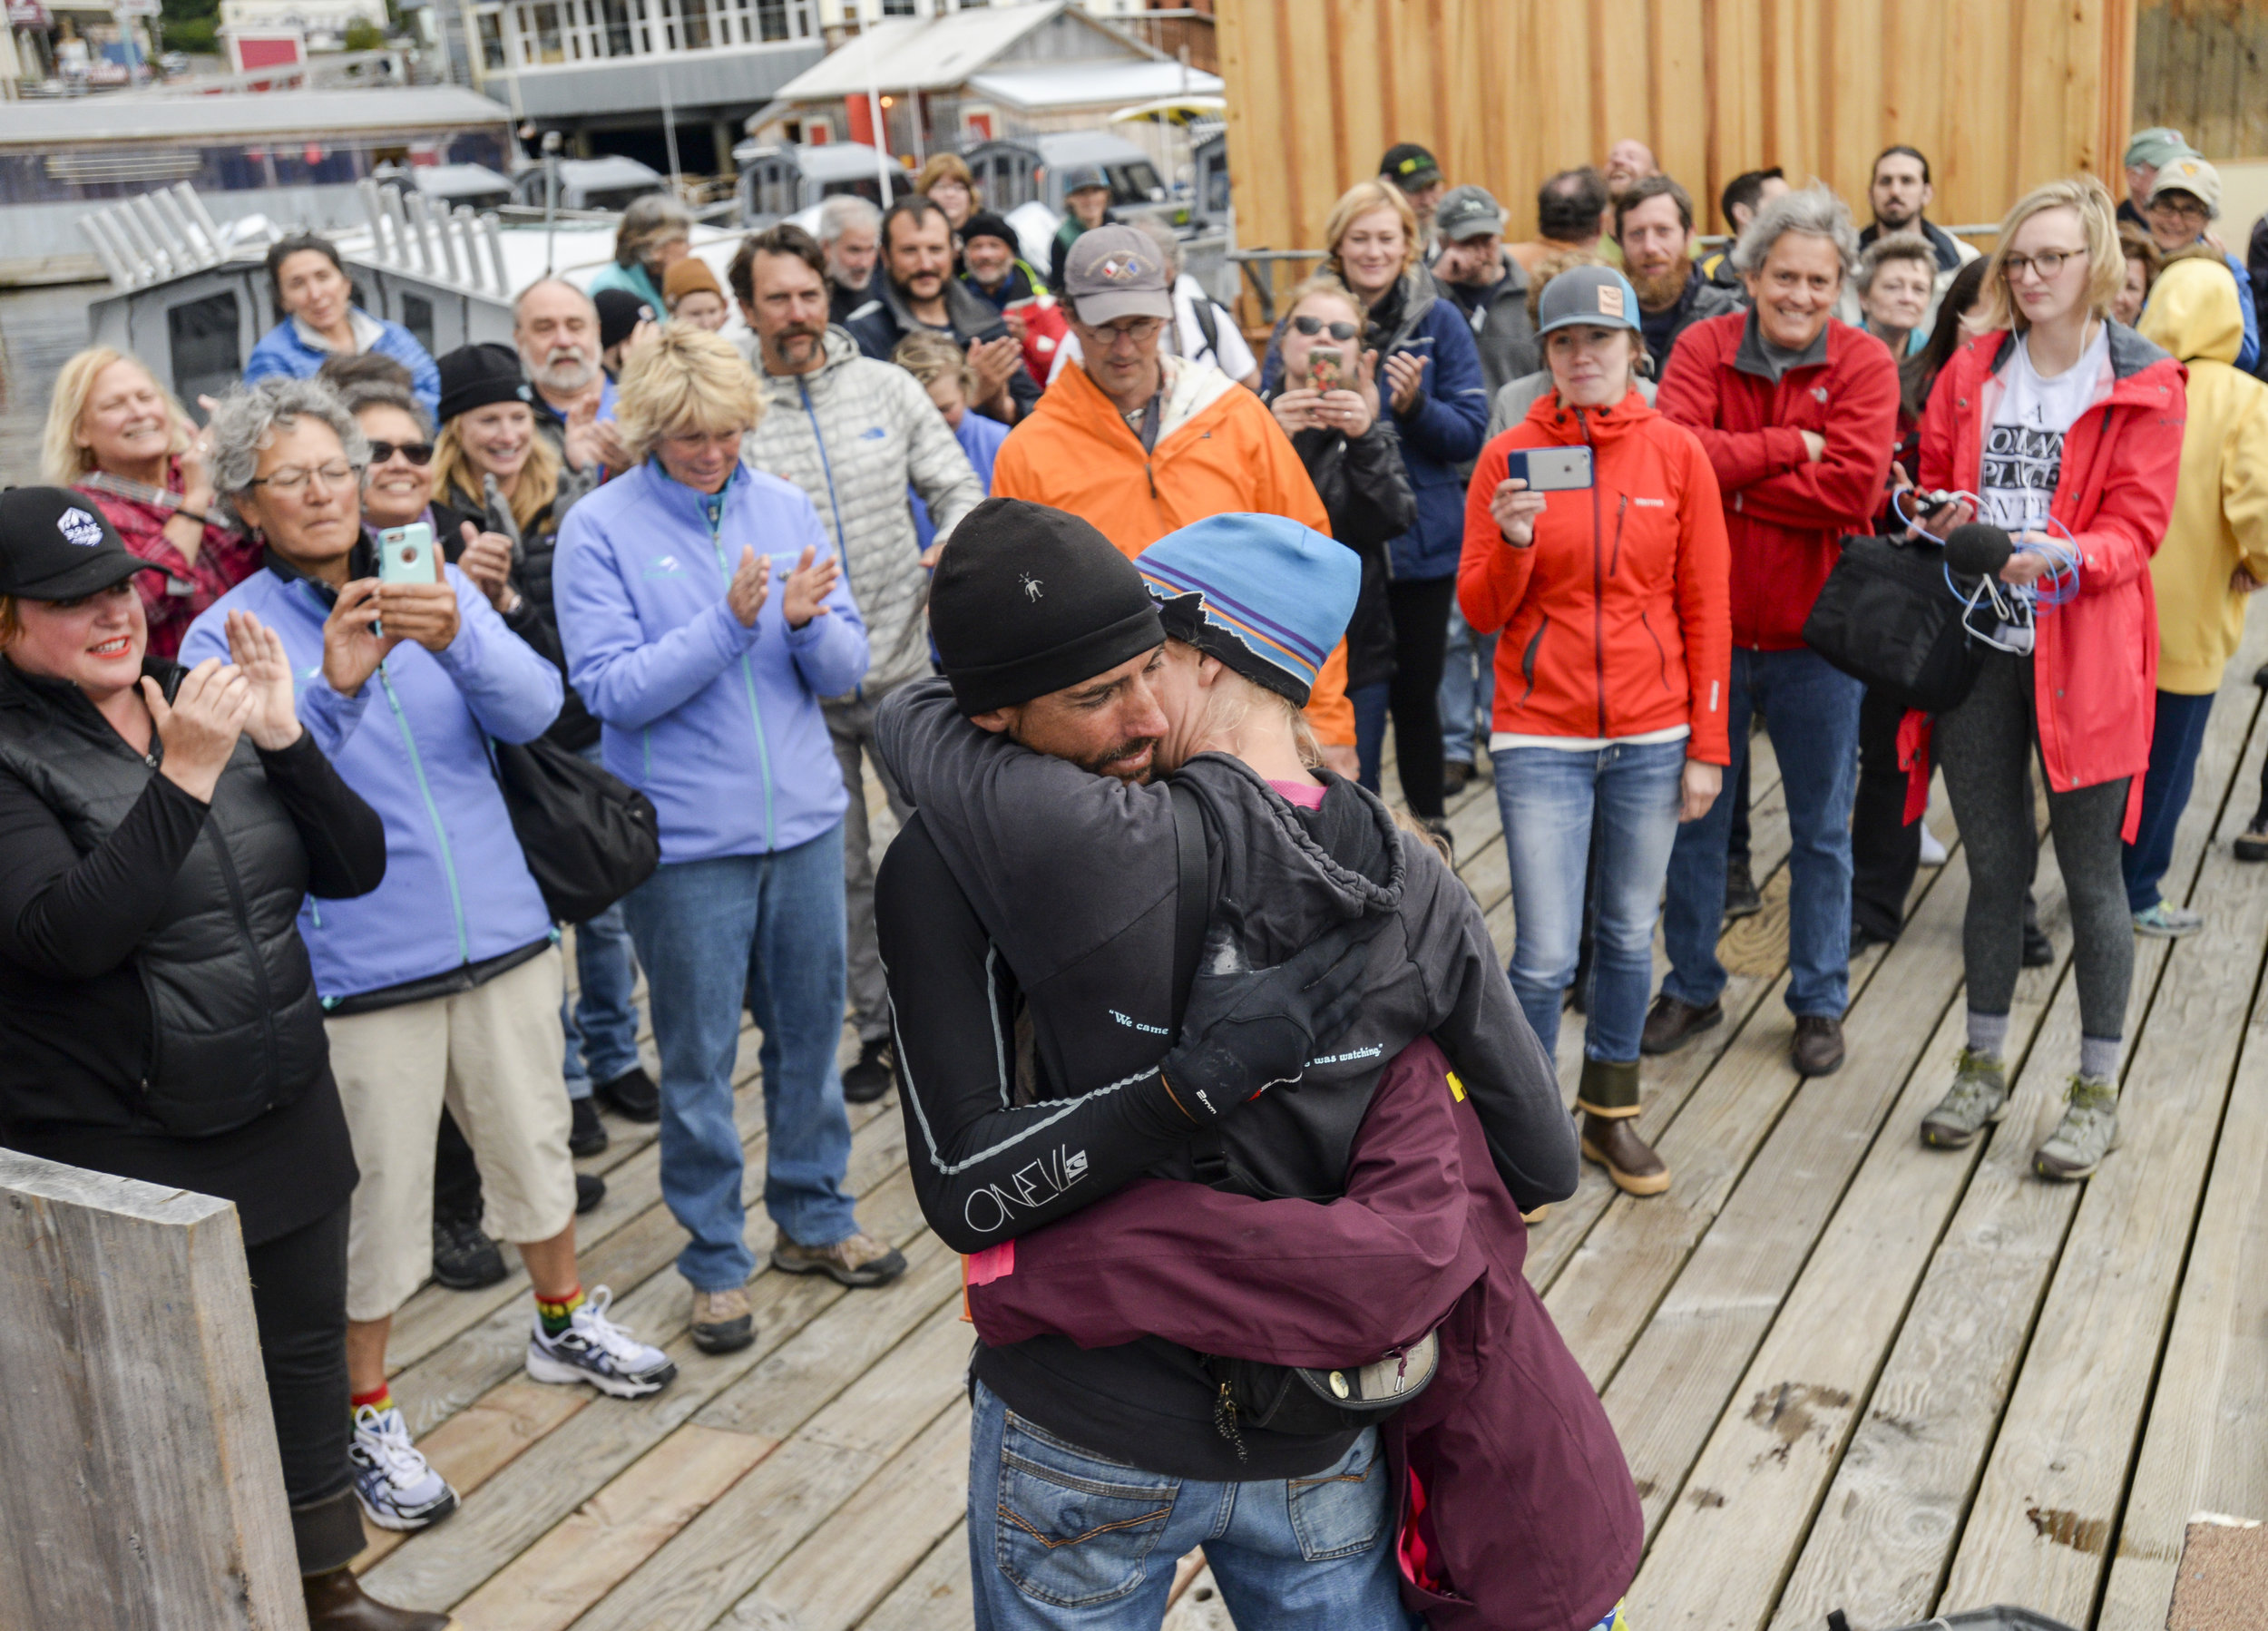  Karl Kruger — the first stand-up paddleboarder to finish the 750-mile Race to Alaska — embraces his wife Jessica Kruger and daughter Dagny Kruger as an amazed crowd applauds Sunday, June 25, 2017, in Thomas Basin. Karl, the lone member of Team Heart